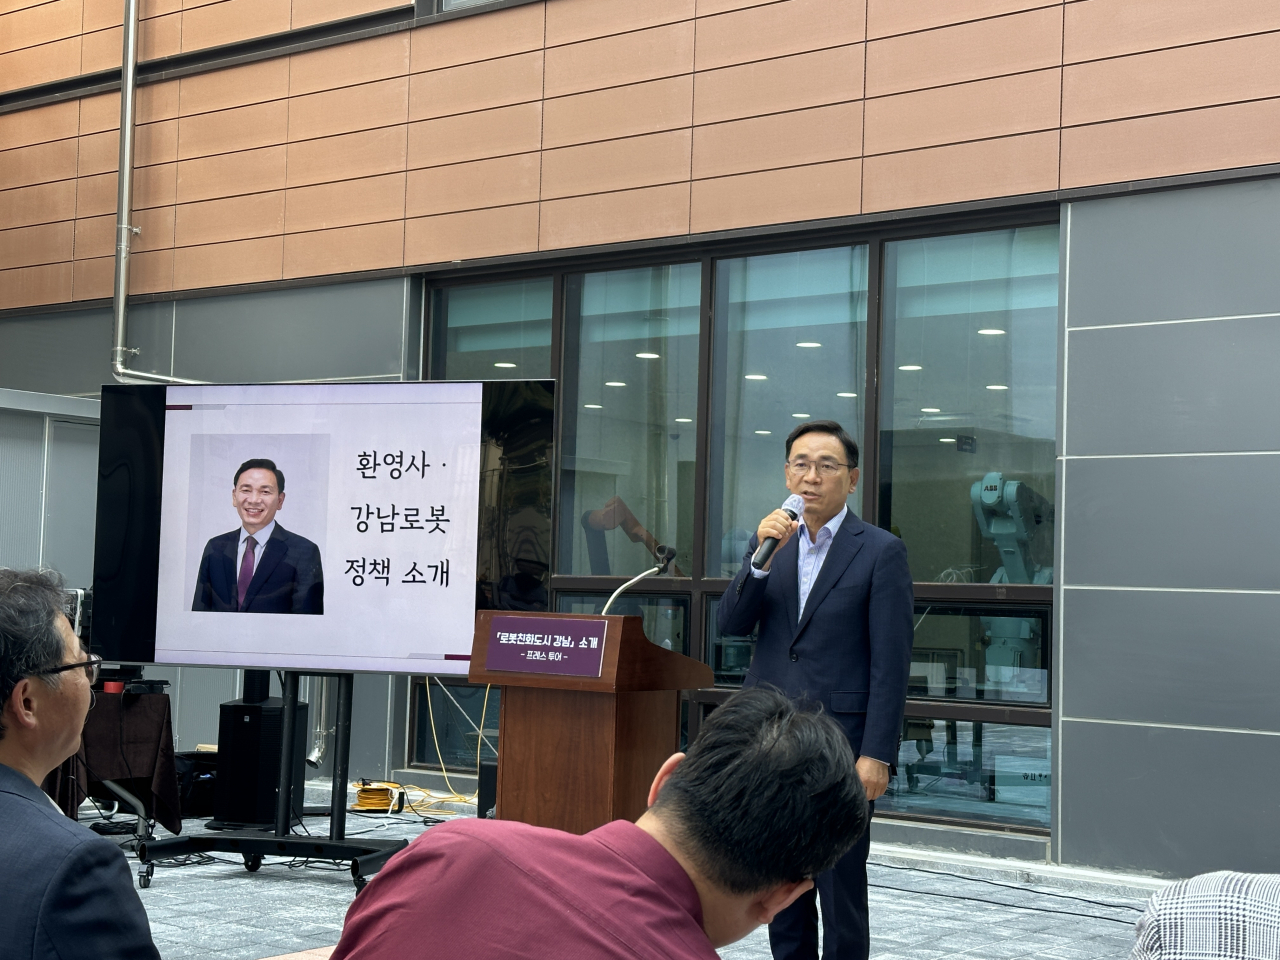 Gangnam-gu ward chief Cho Sung-myung speaks during a press briefing in Suseo on June 18. (Lee Jung-joo/The Korea Herald)